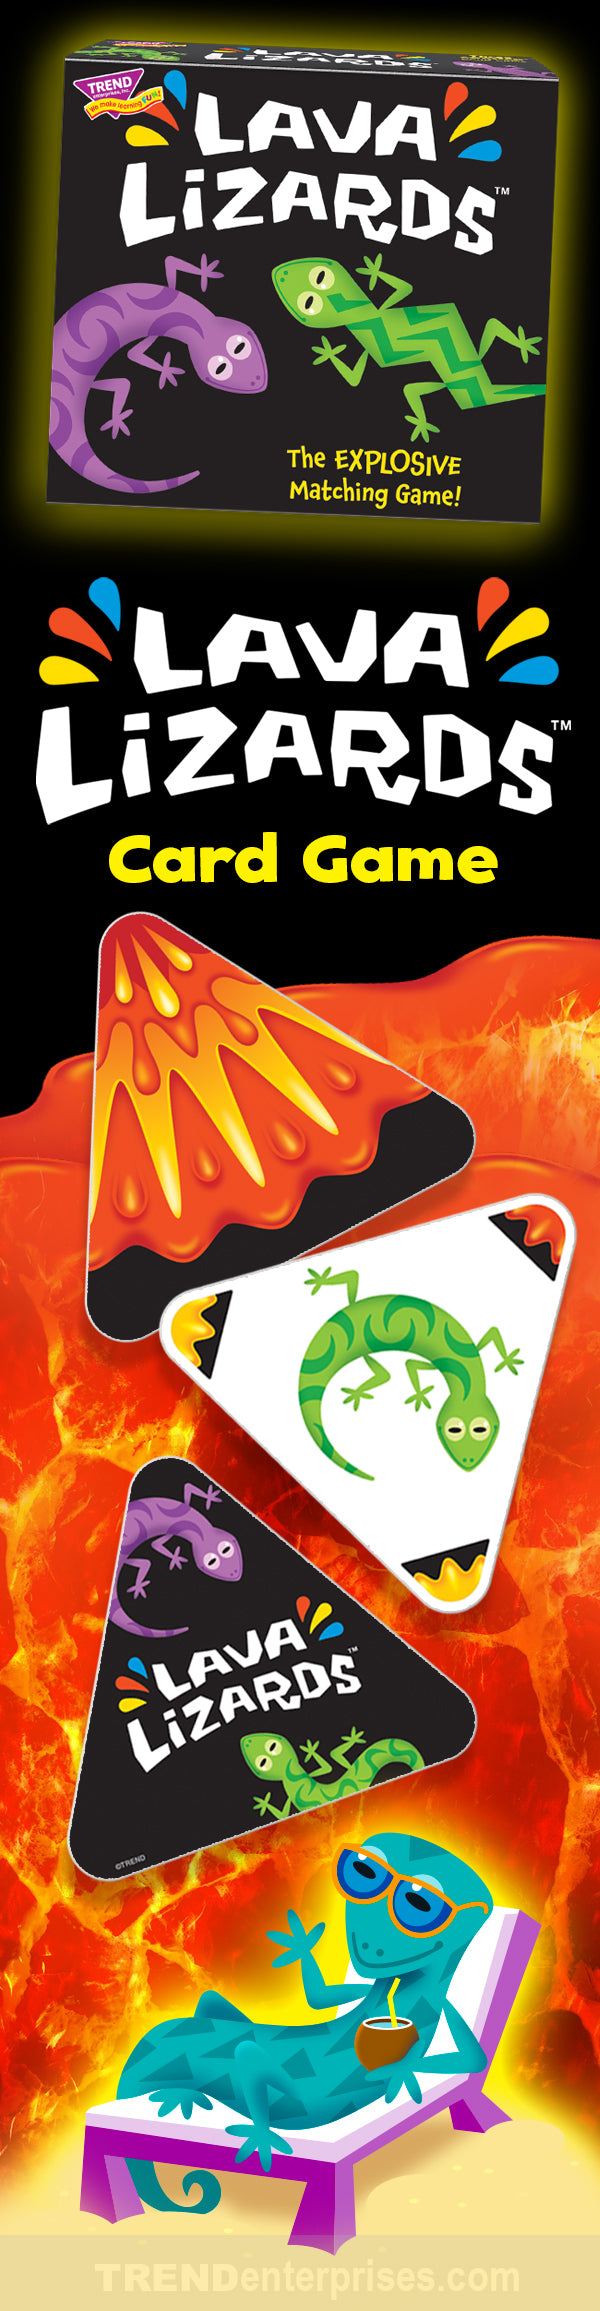 Lava Lizards™ triangle card game for kids! Get ready for a game full of explosive finishes! Lava lizards spend their days lounging on hot lava rocks, unknowingly surrounded by active volcanoes that may explode any second...